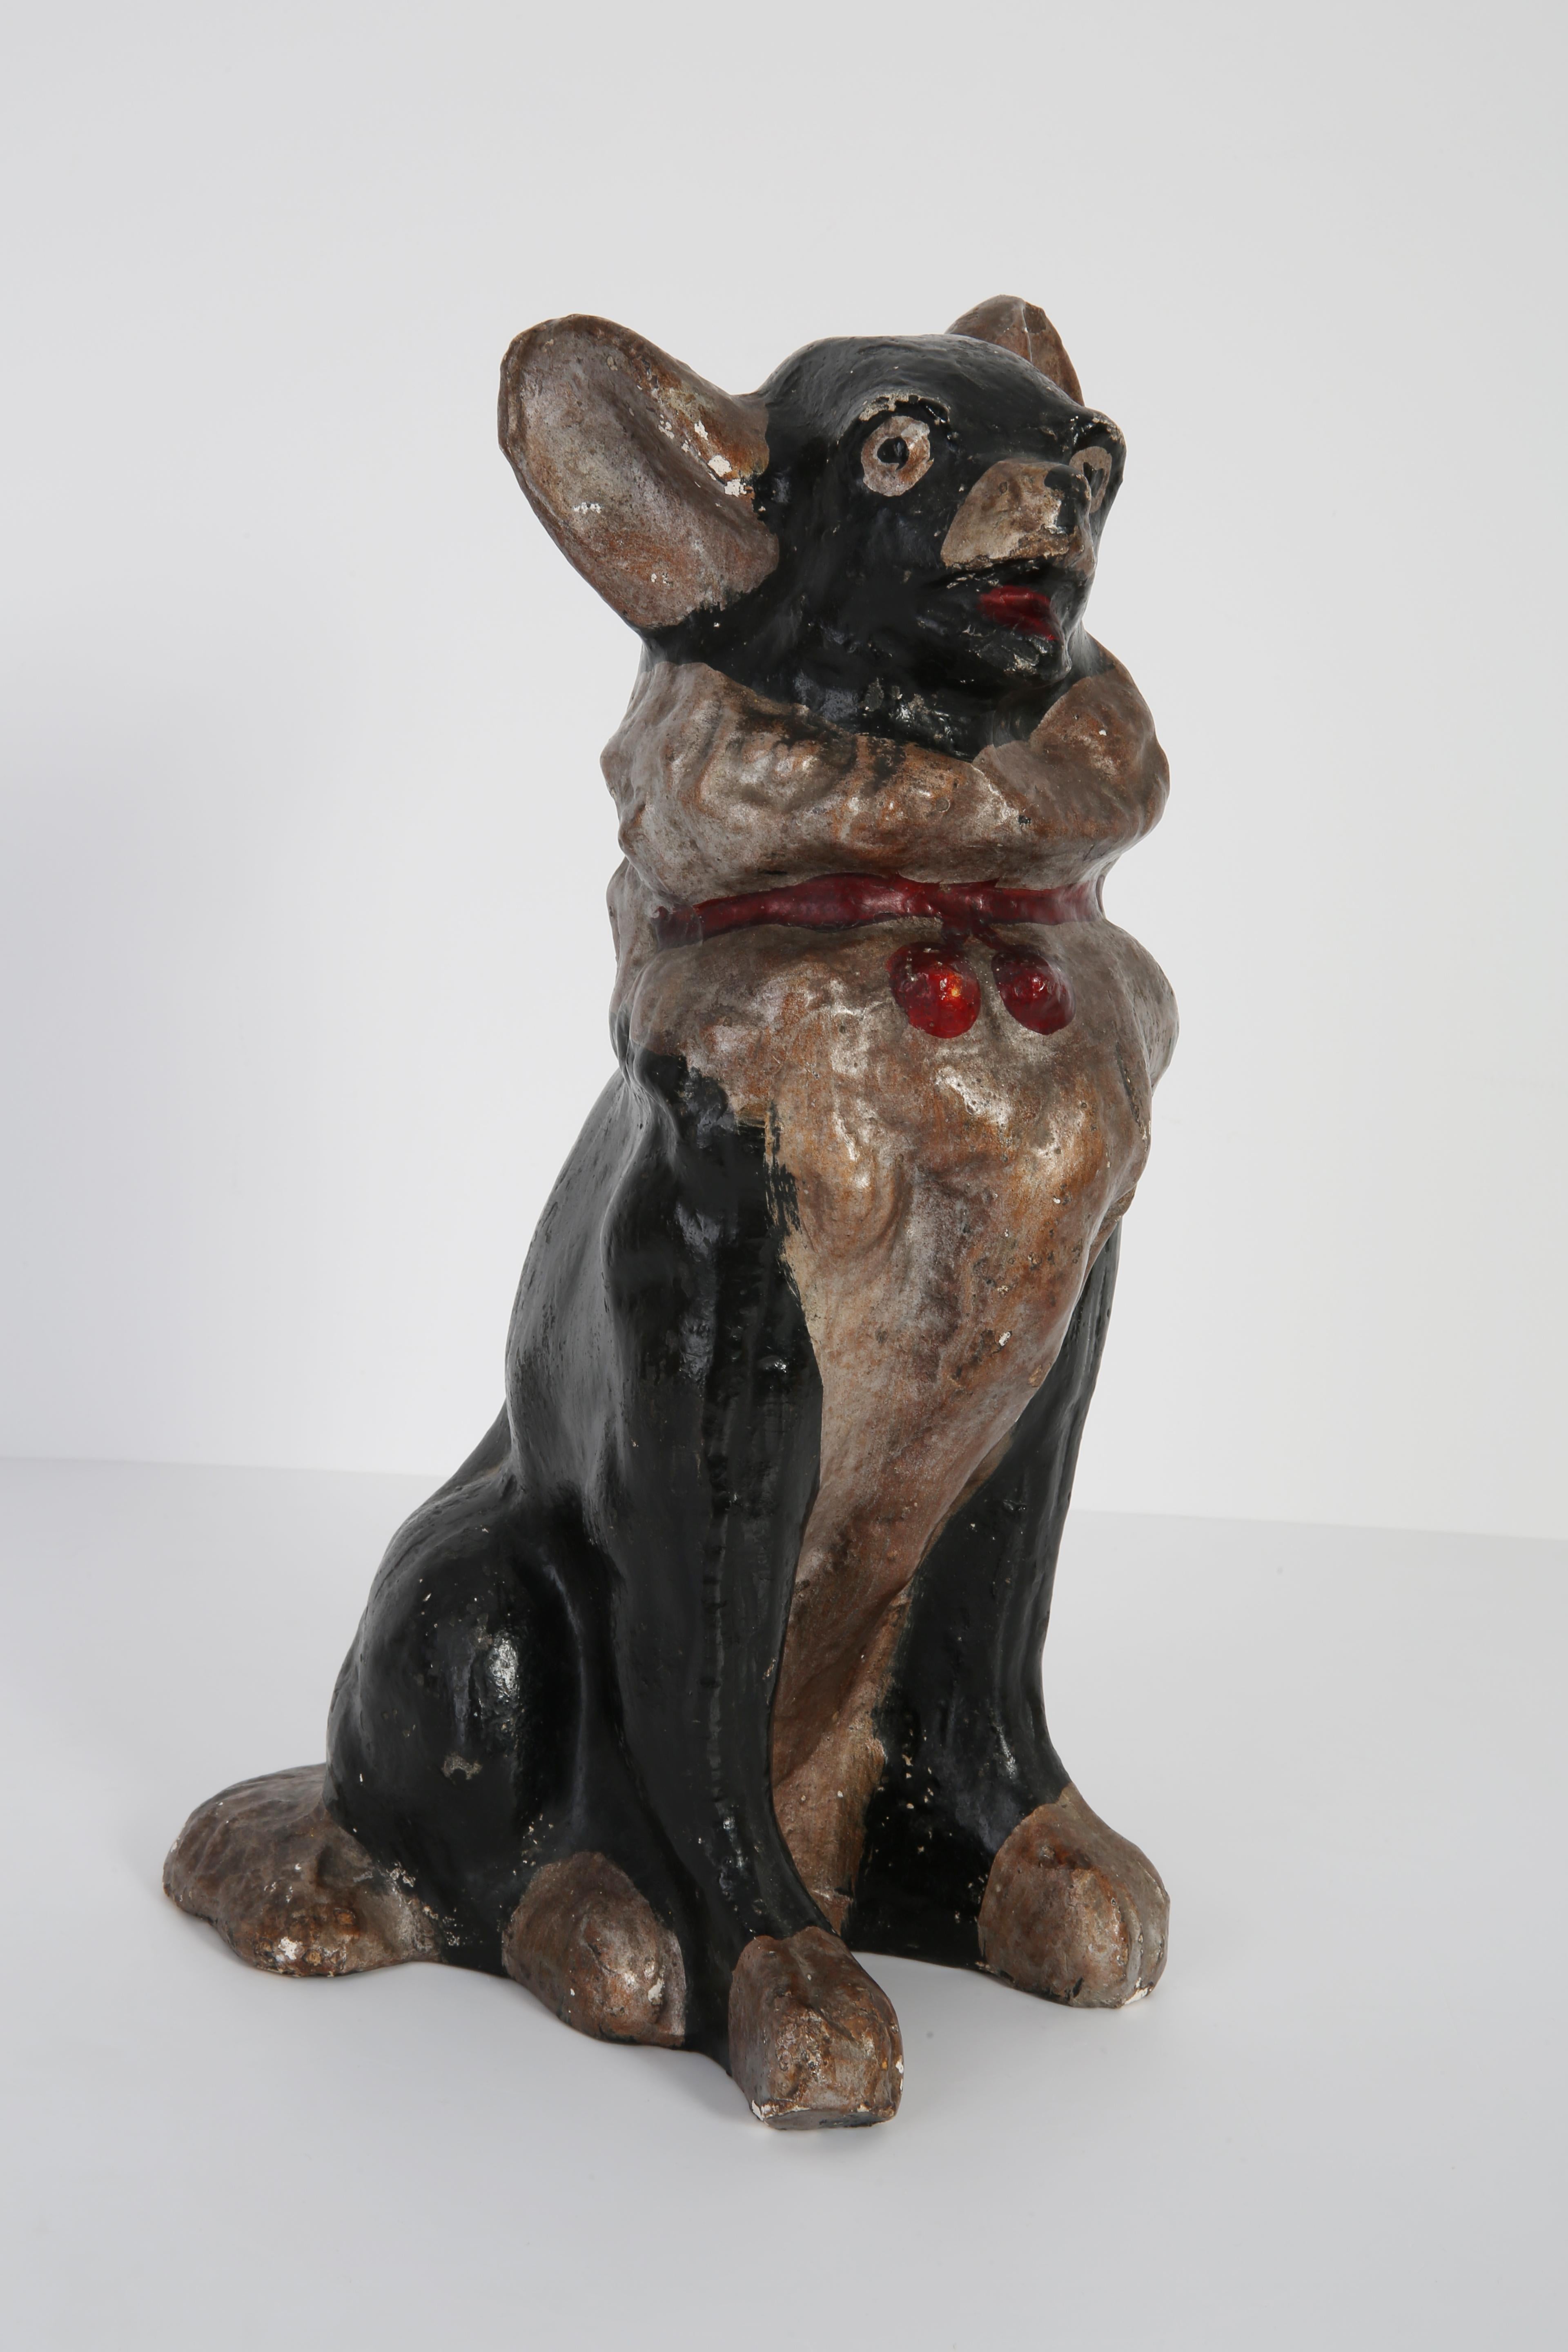 Italian sculpture, original good vintage condition. All damages on pictures. The dog was produced in 1960s in Italy.